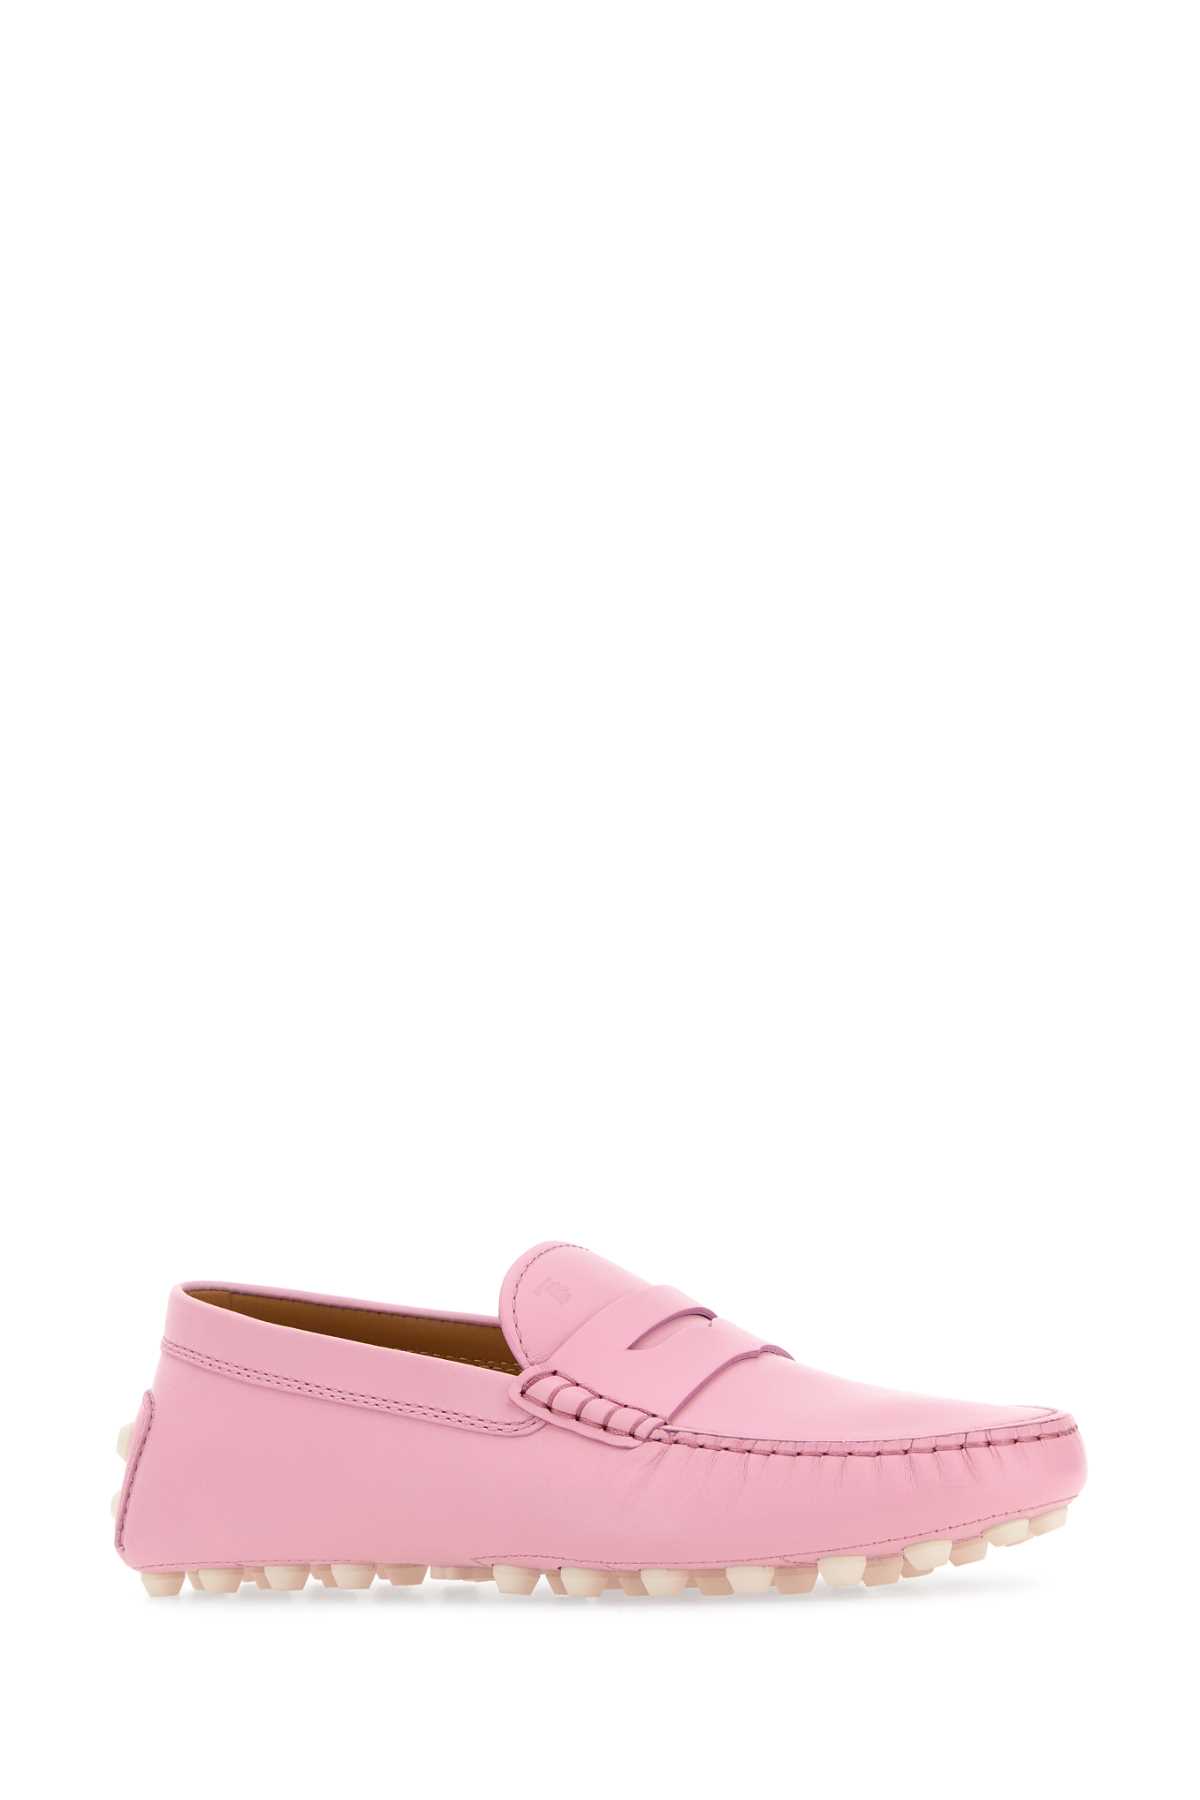 Tod's Pink Leather Gommino Bubble Loafers In Macaron